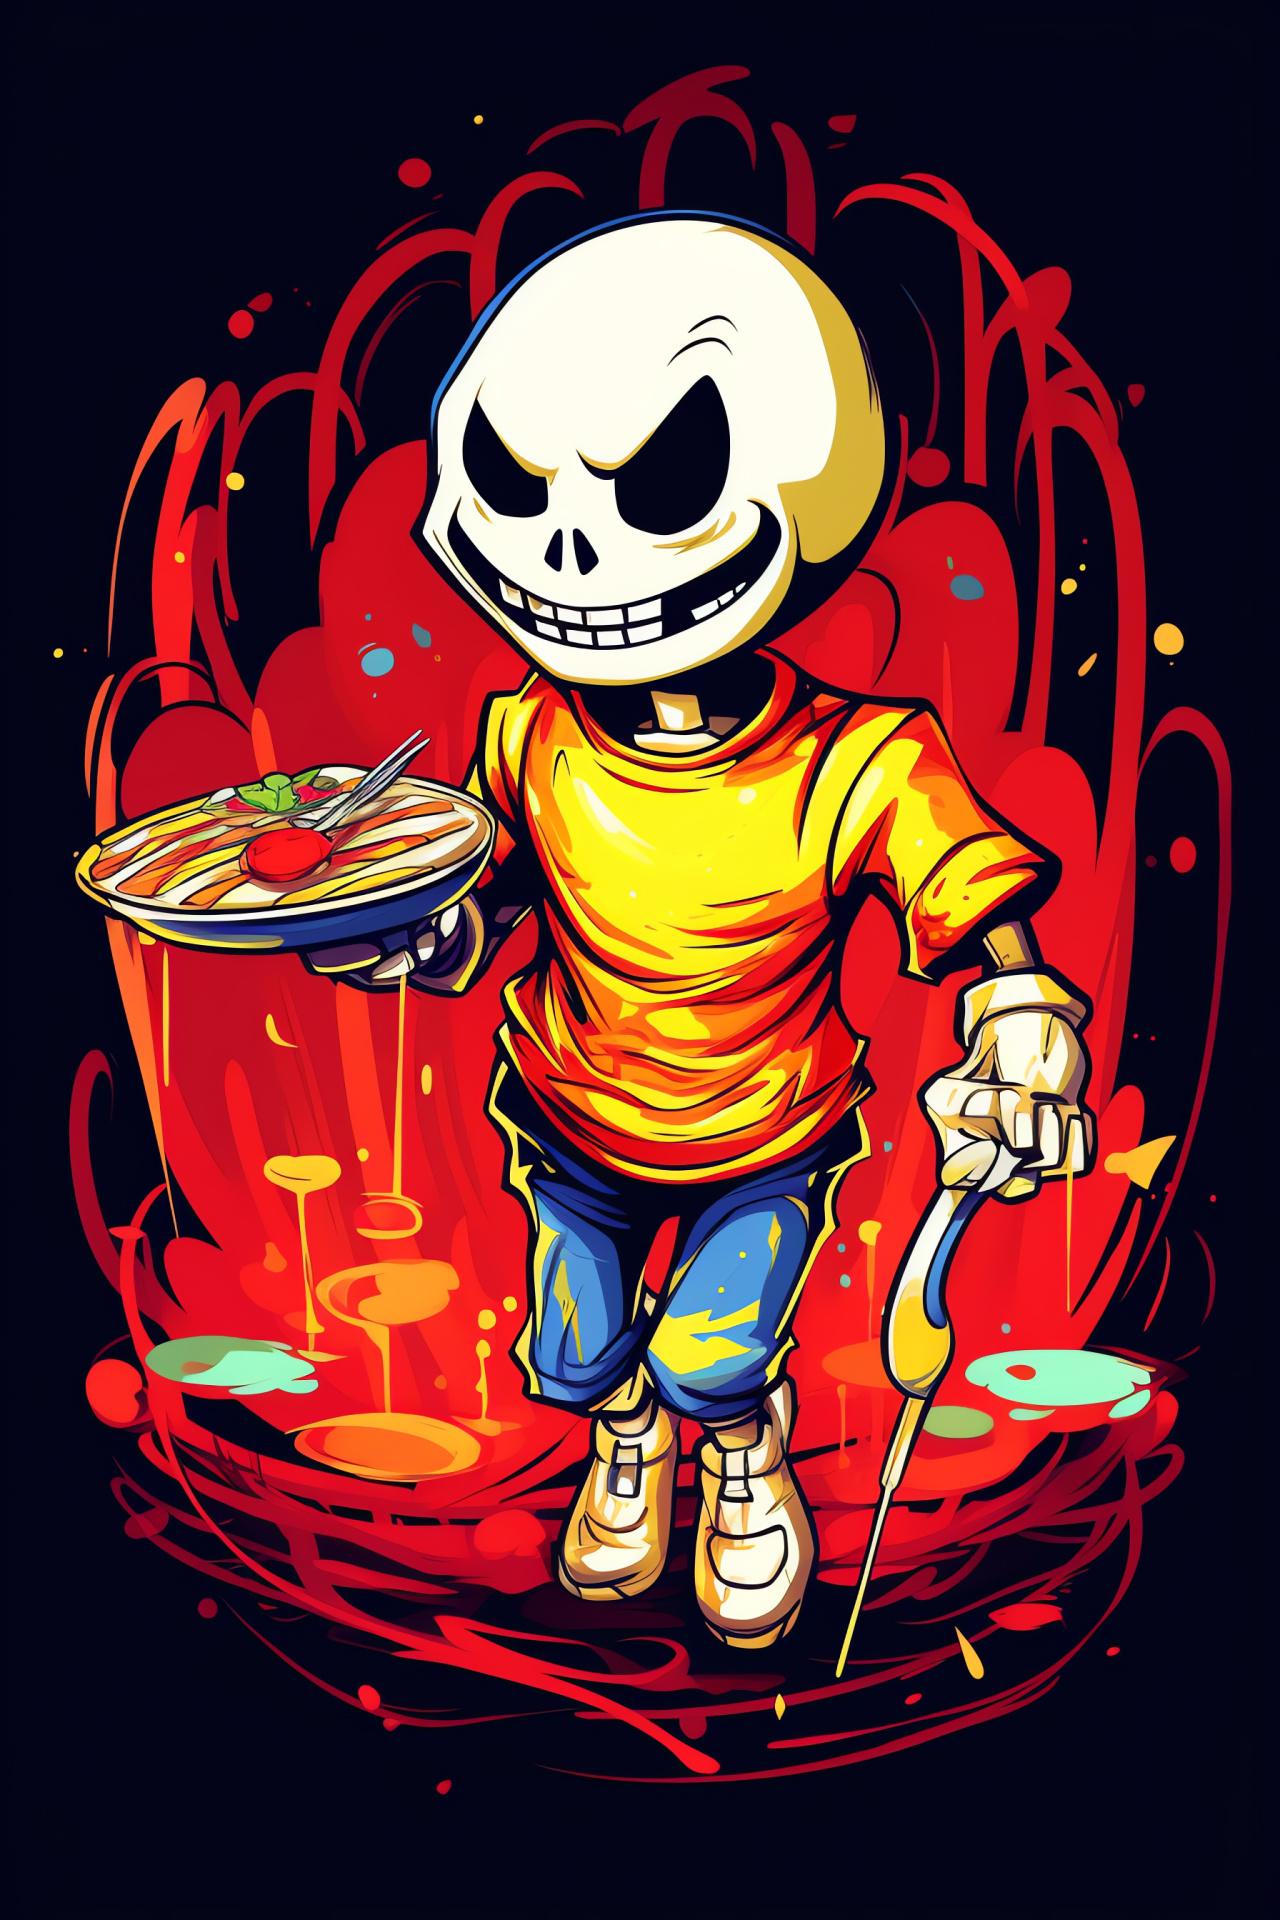 Undertale Character Papyrus, Skeletal Graphic, Eye Illumination, Dual-toned Design, Simple Contrast, HD Phone Image